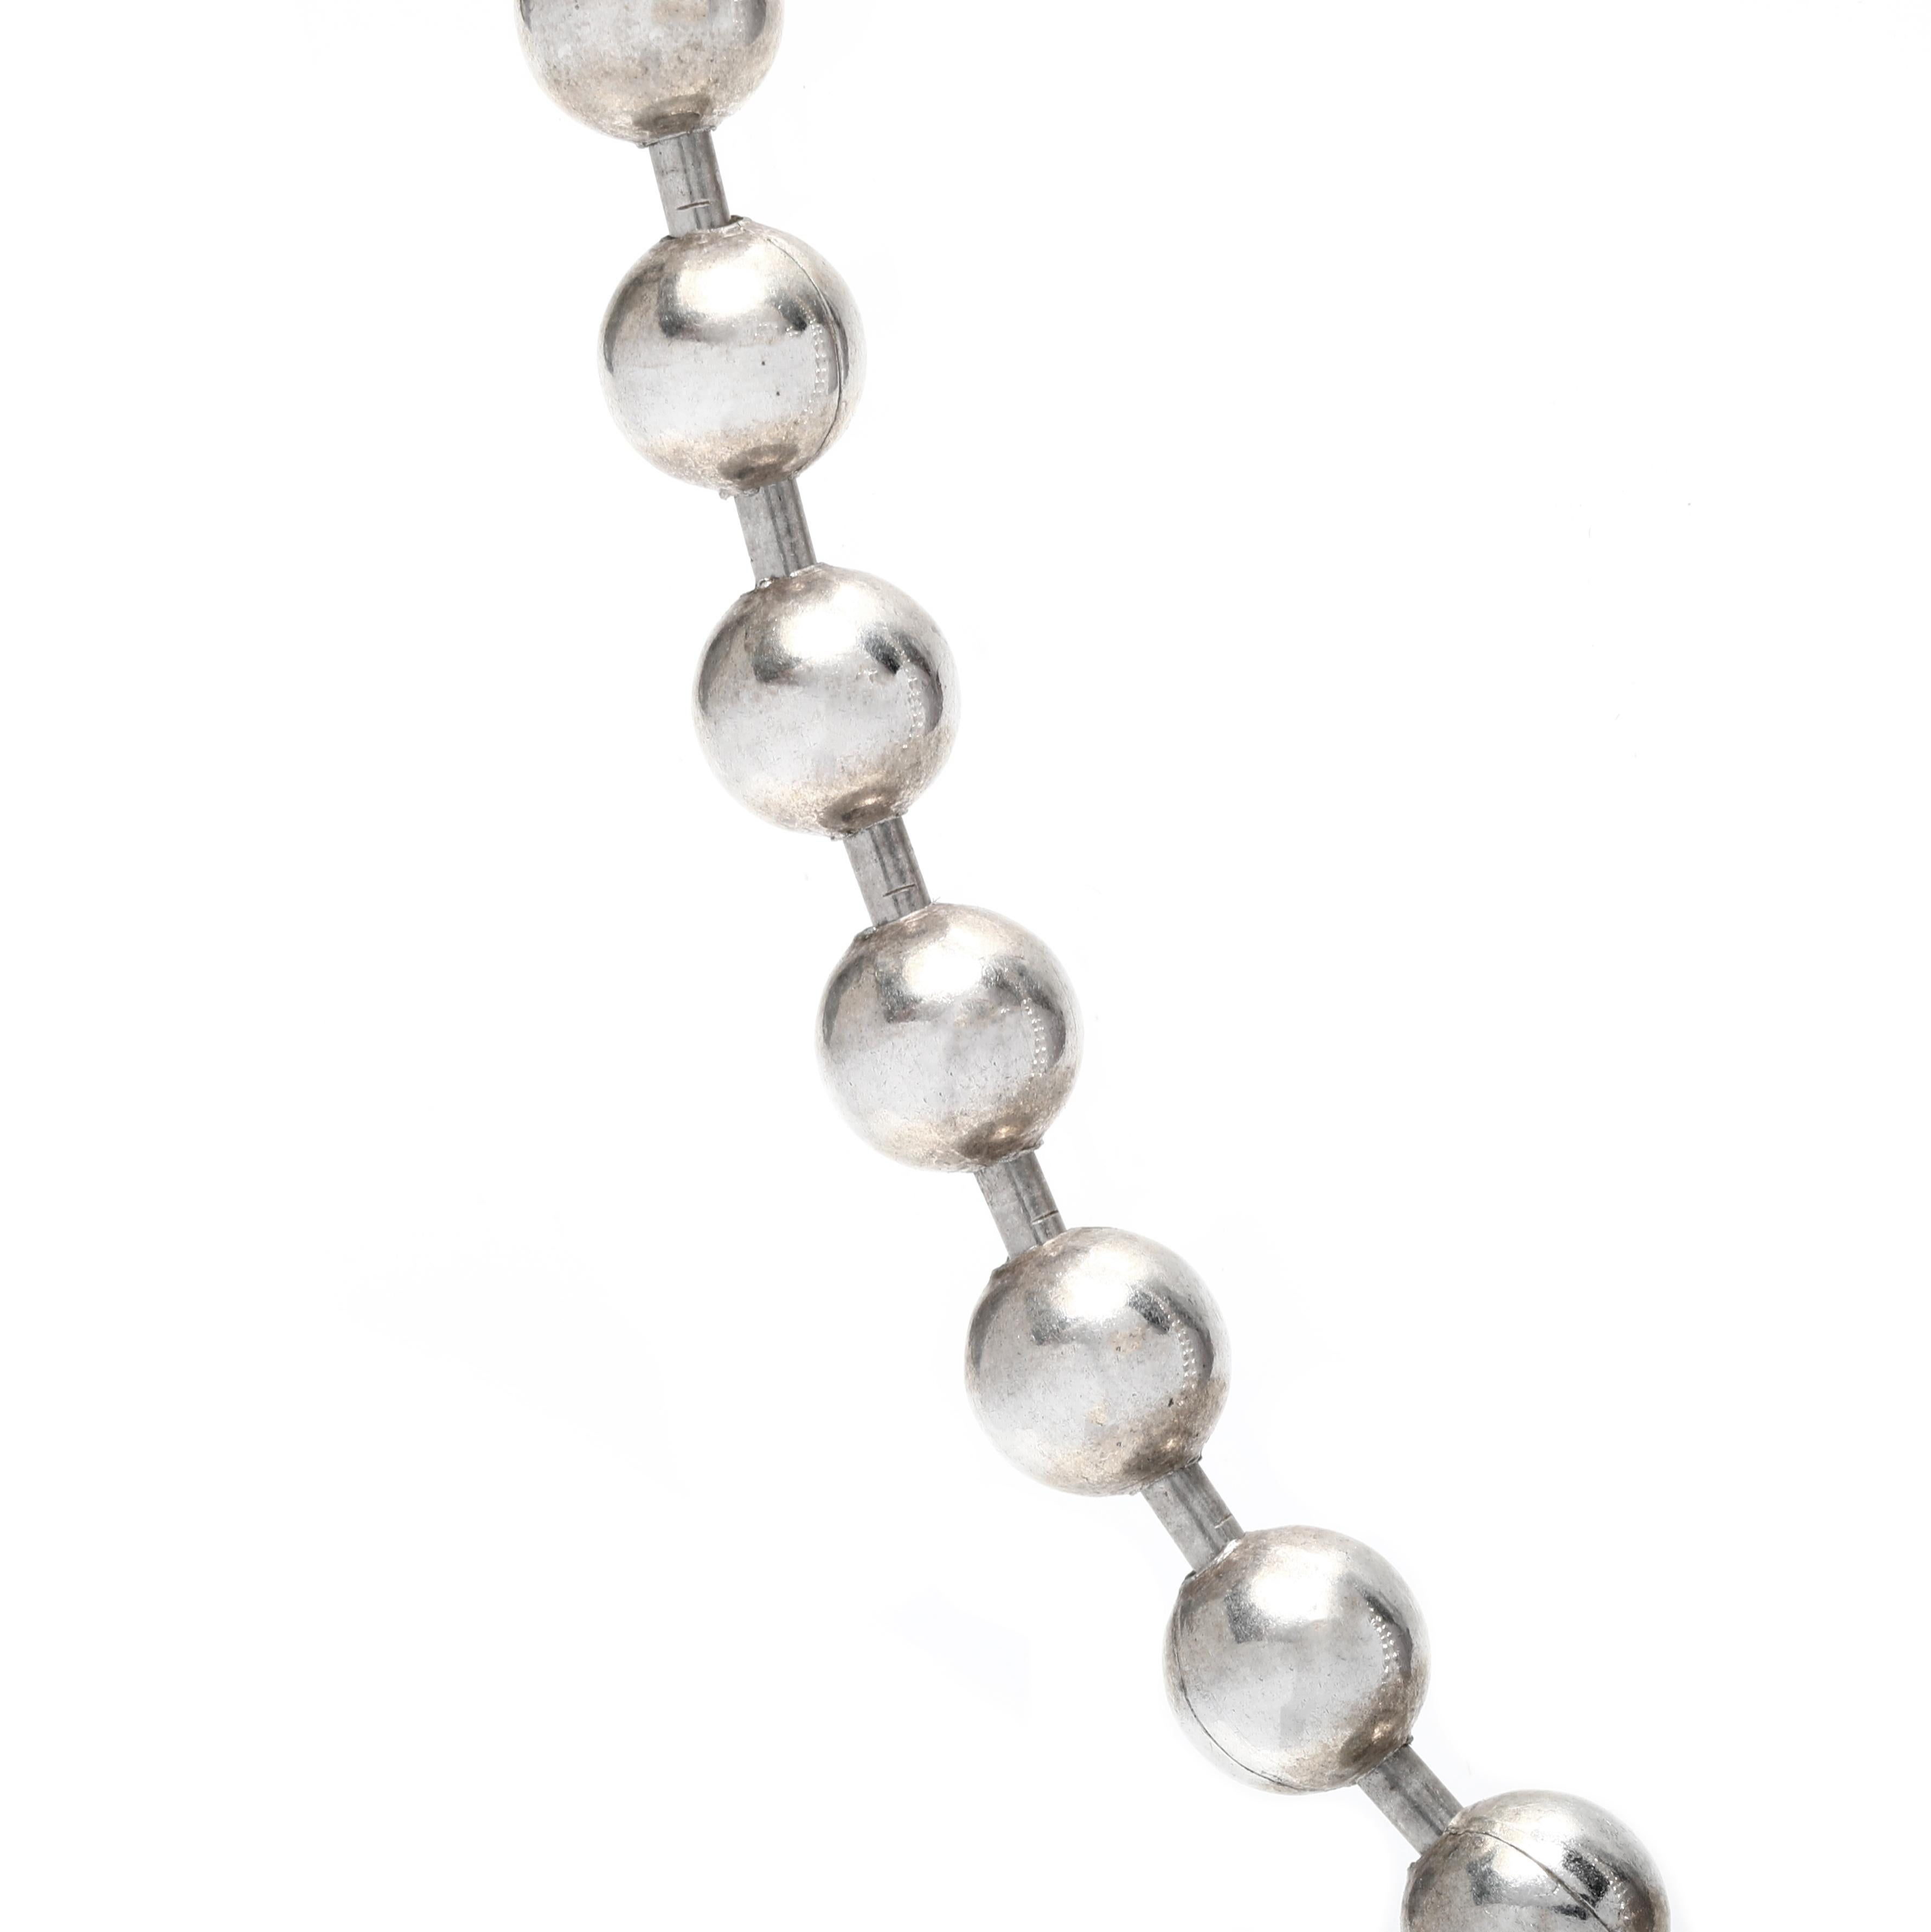 This large sterling silver bead chain necklace is the perfect addition to any outfit. The length of the bead chain is 18.50 inches and is crafted with genuine sterling silver for a stunning and eye-catching look. Whether you're looking for a